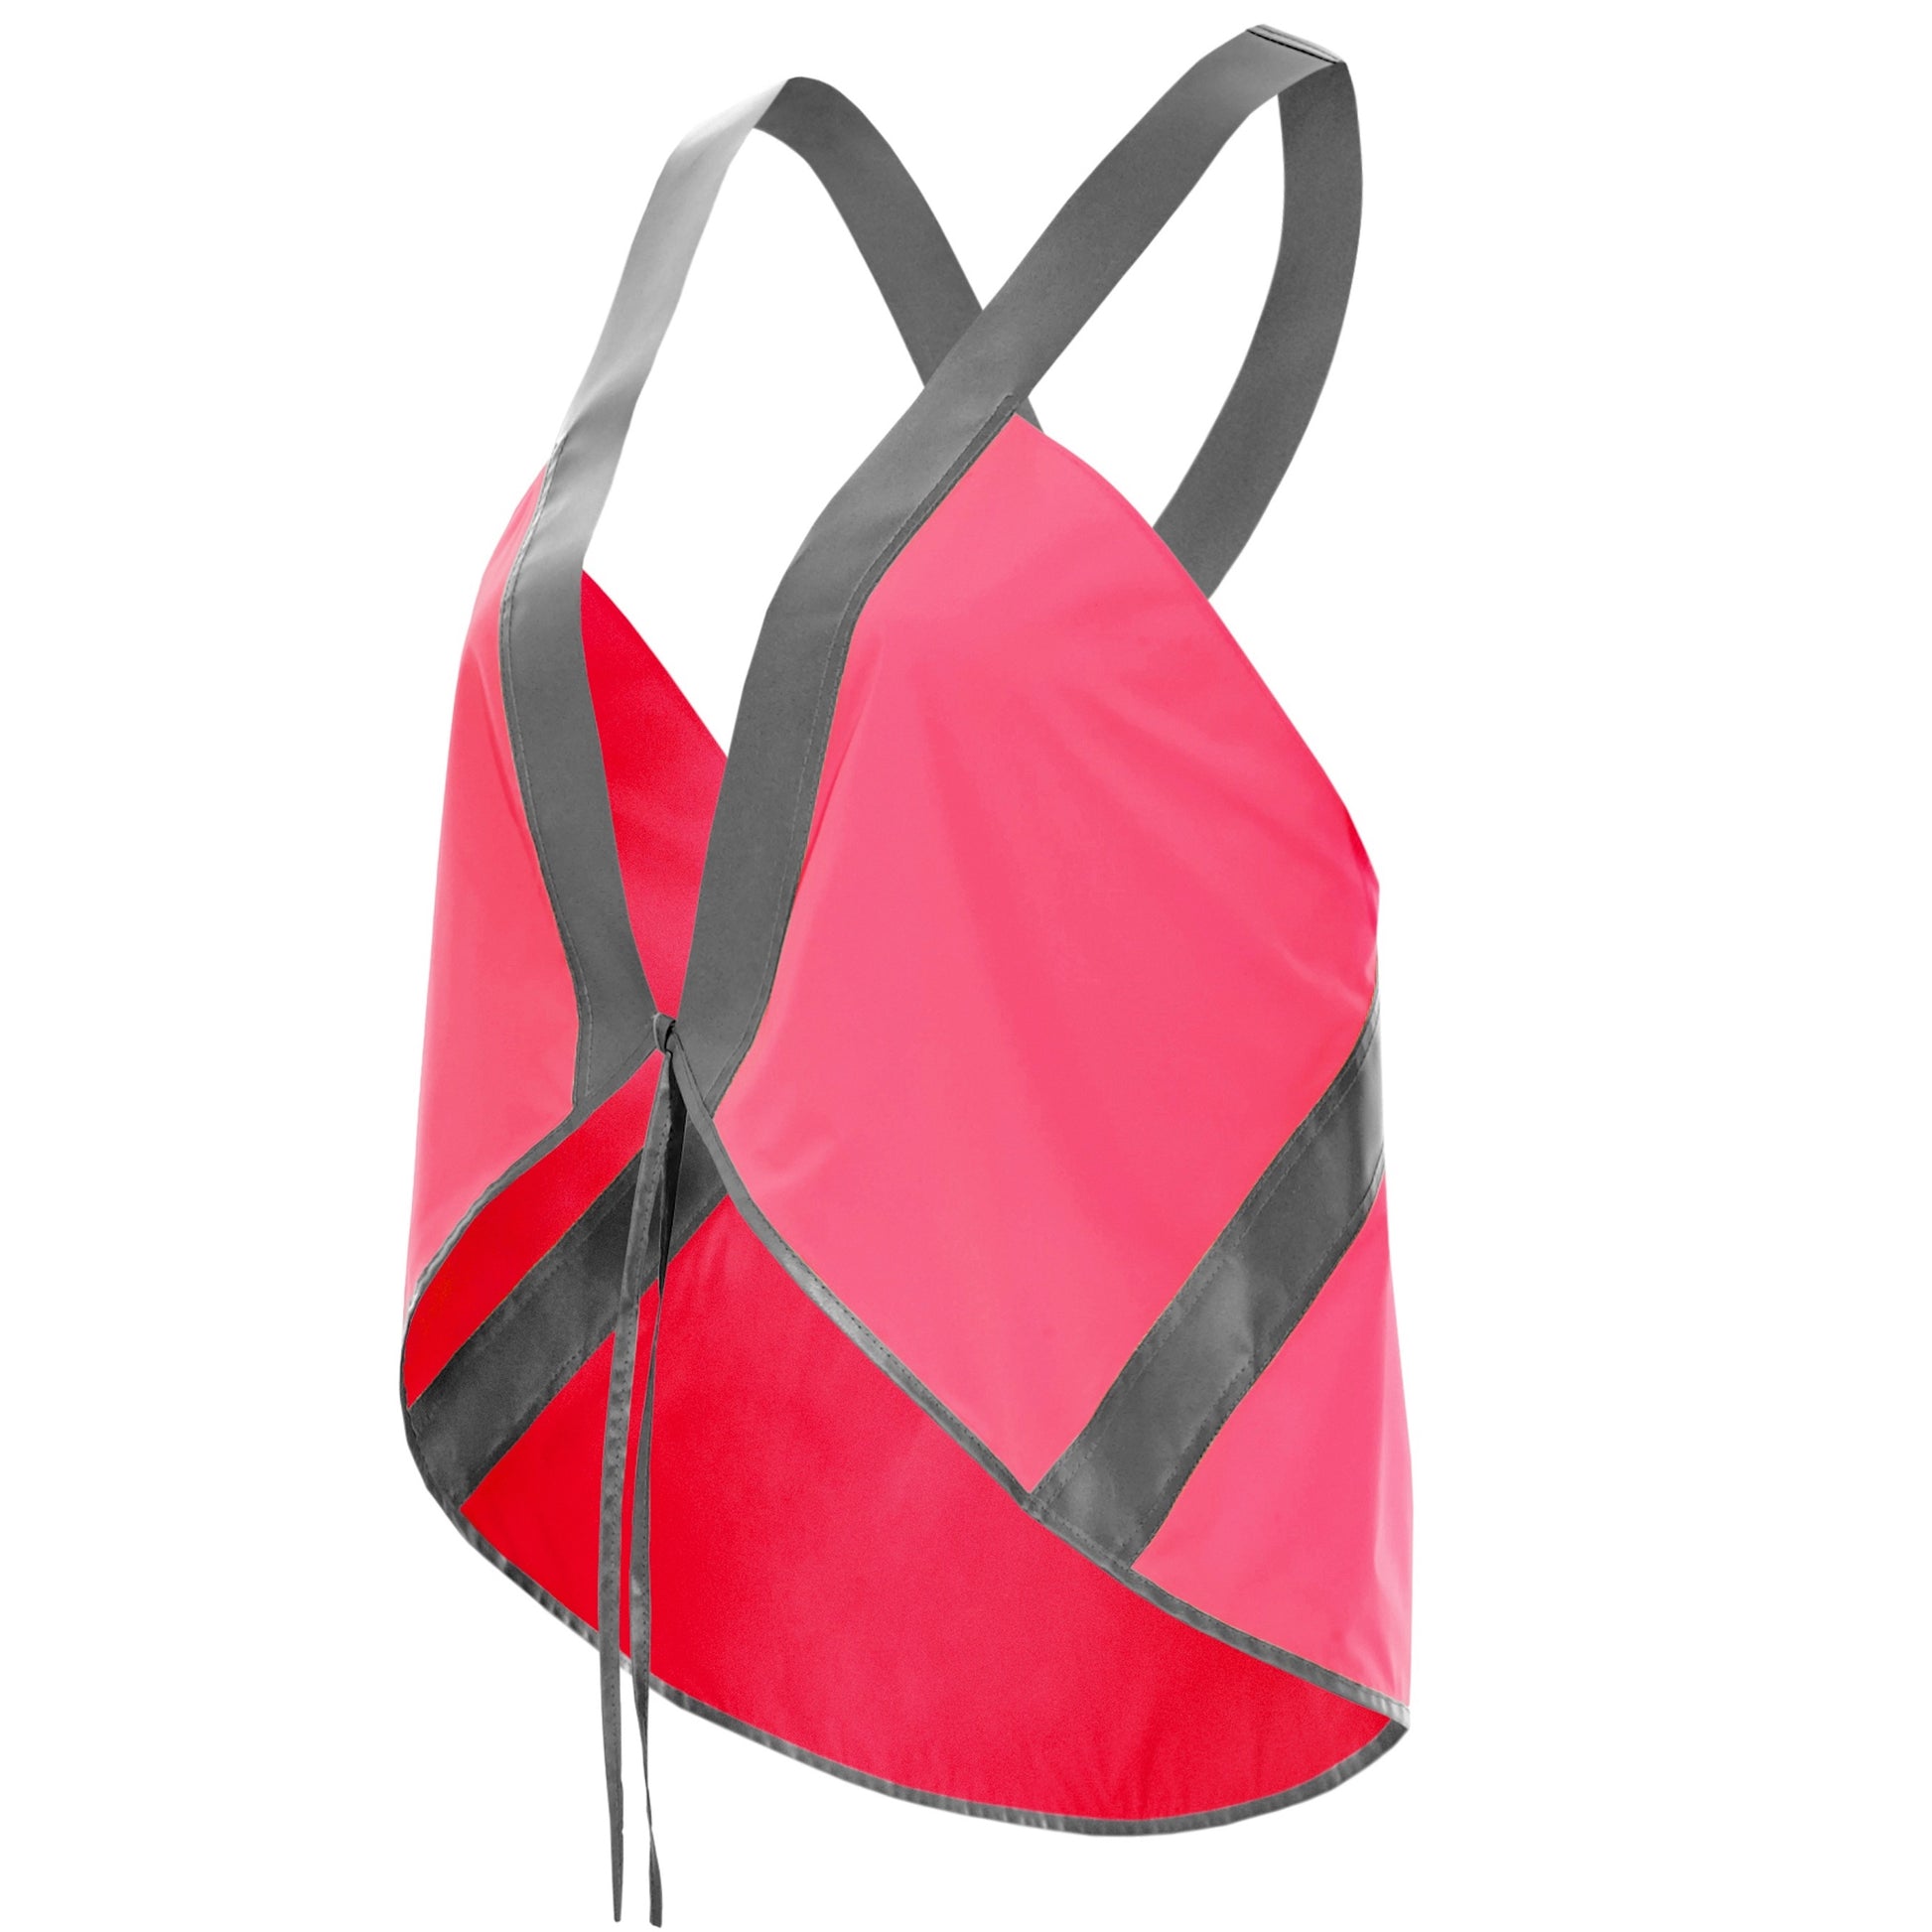 cute vespert eco cotton candy neon pink stylish reflective hi vis safety vest for women reflecting clothing high visibility gear accessory womens fashion bike bike cycling walk run running dog walking walker night sustainable nighttime bright 3M scotchlite made in NYC USA